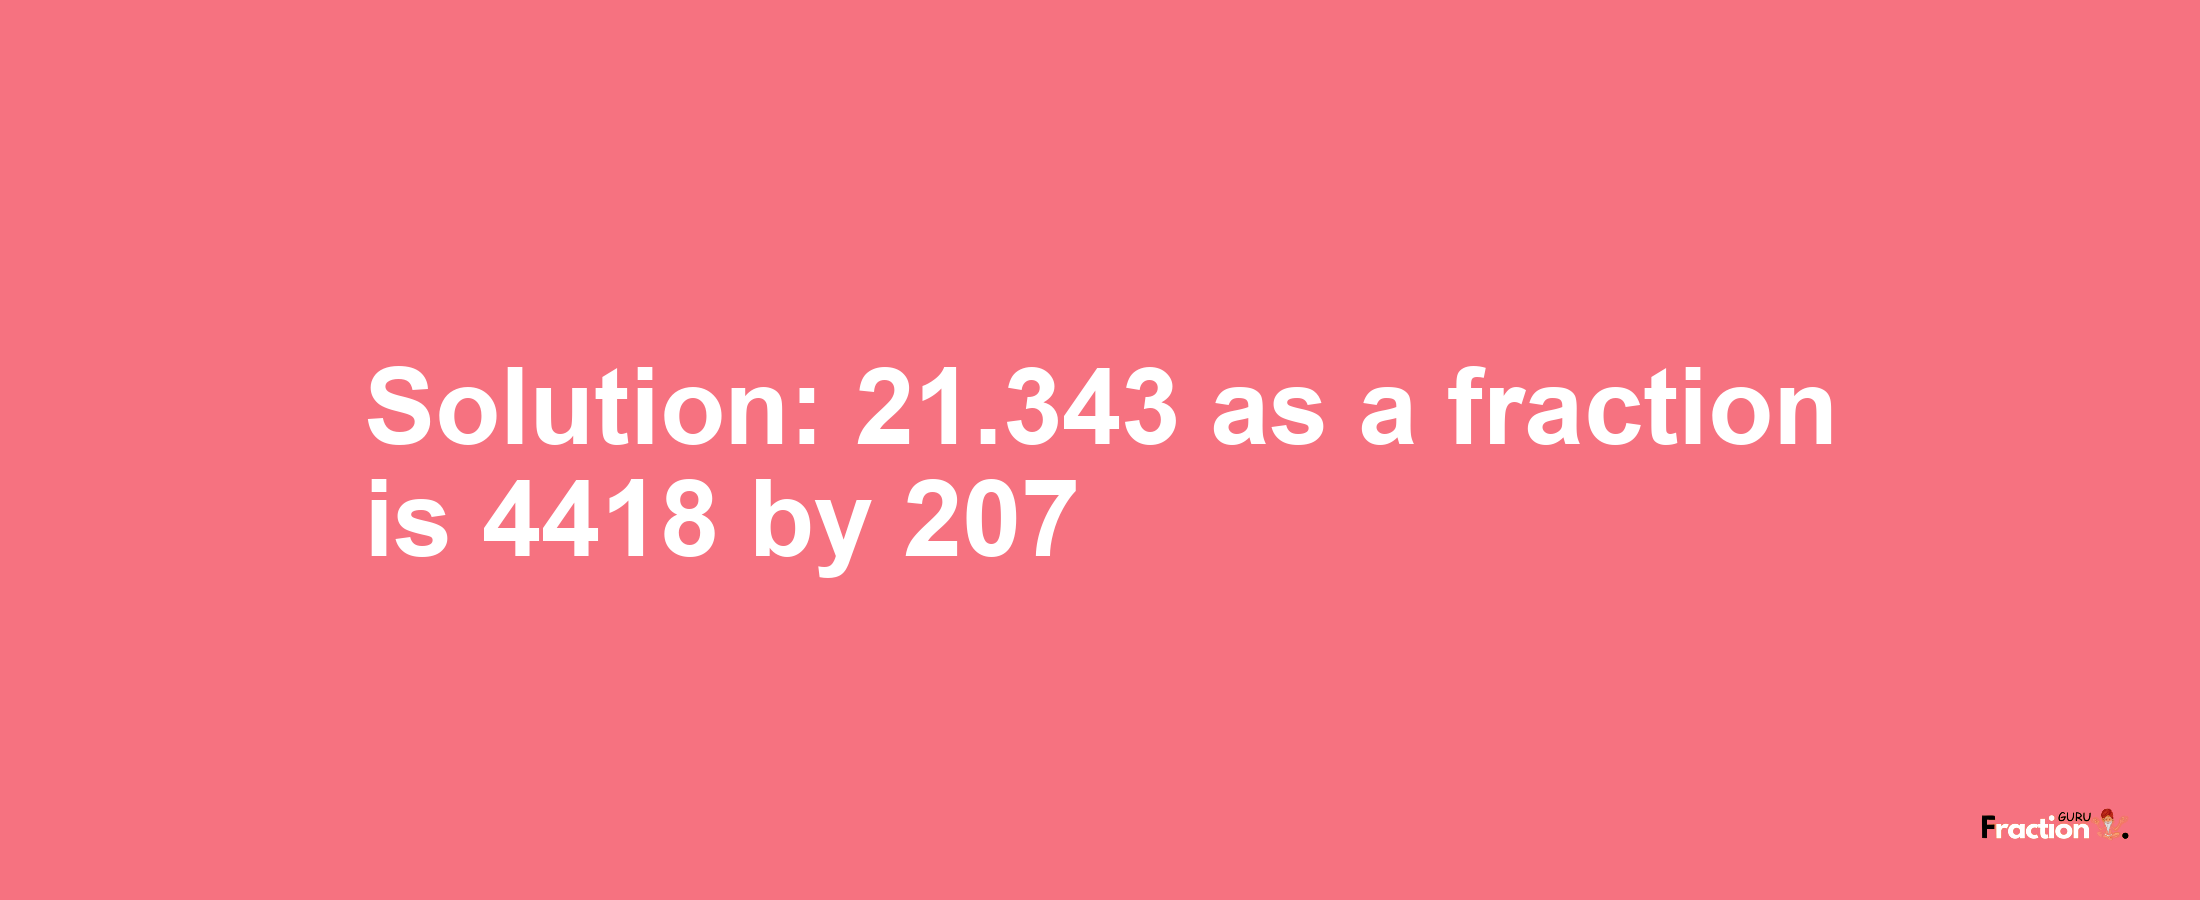 Solution:21.343 as a fraction is 4418/207